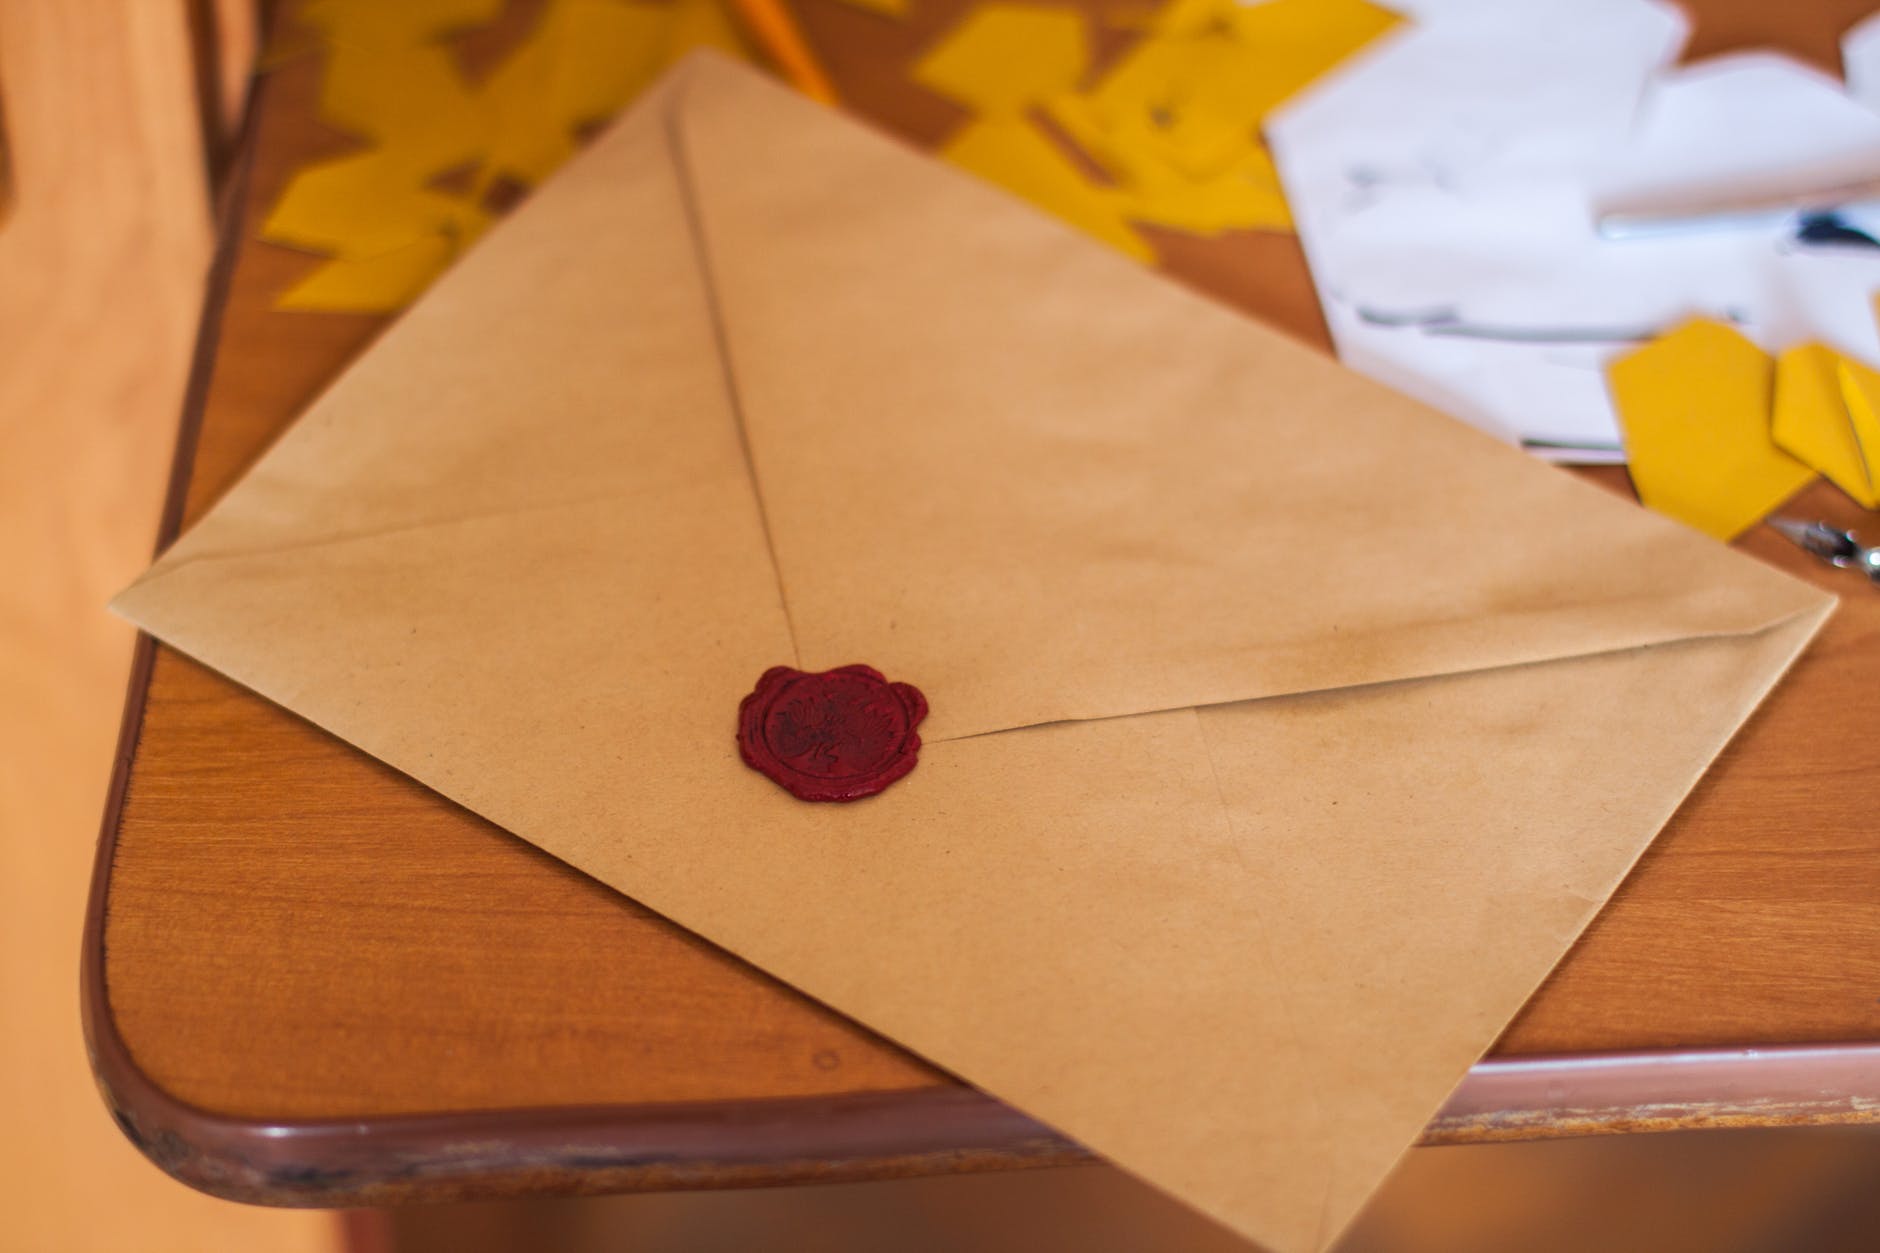 Scottie finally gave her a letter from her son. | Source: Pexels